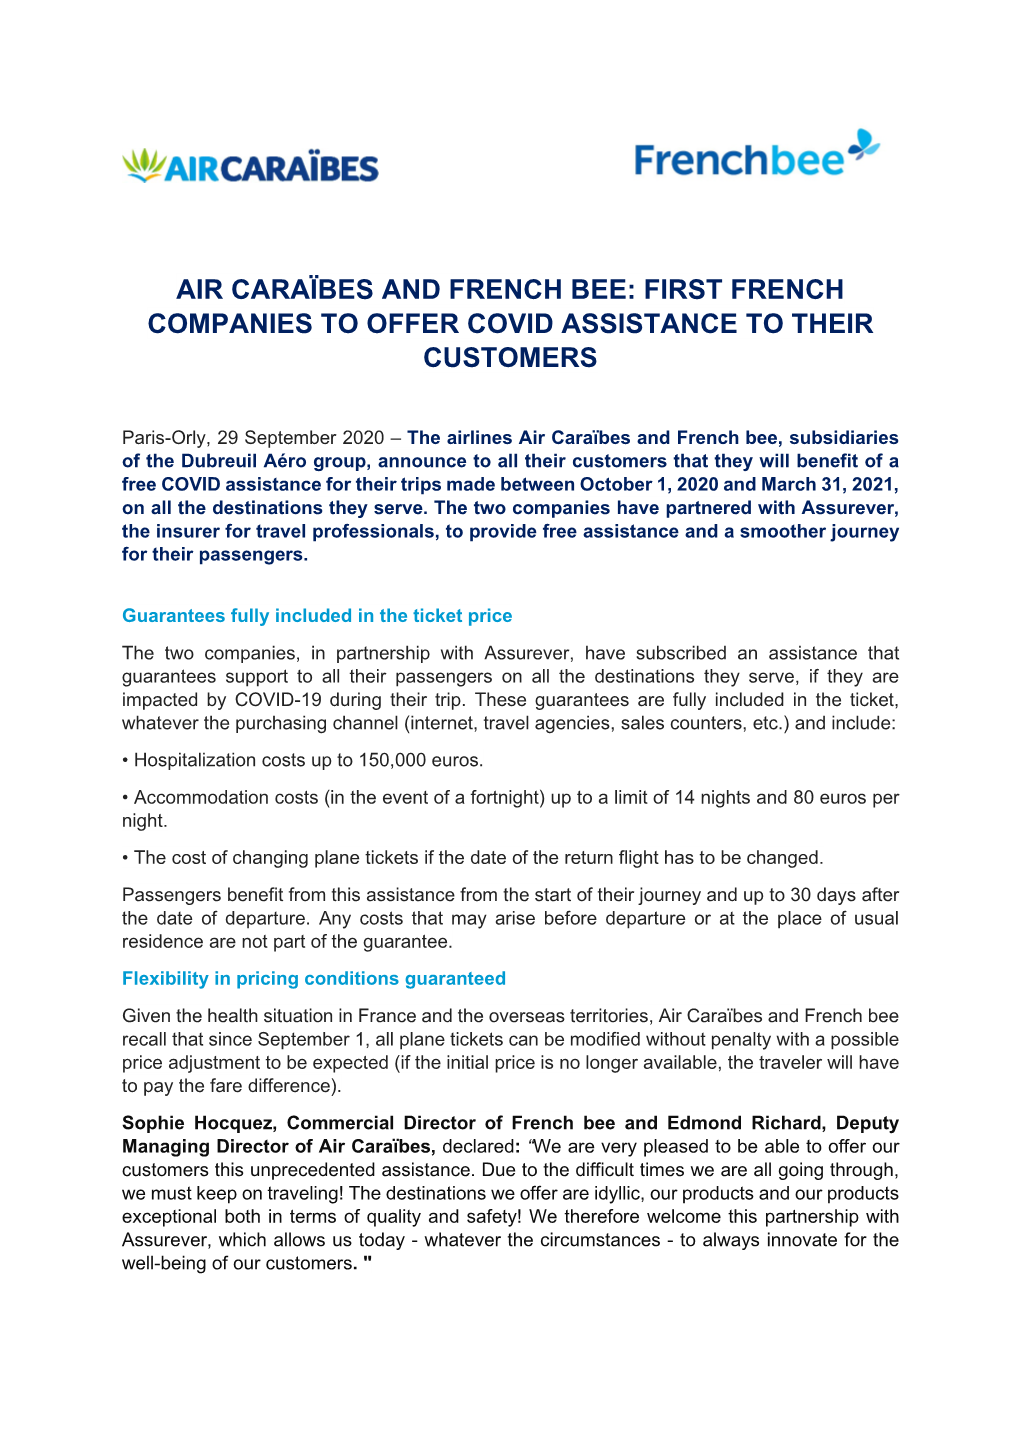 Air Caraïbes and French Bee: First French Companies to Offer Covid Assistance to Their Customers